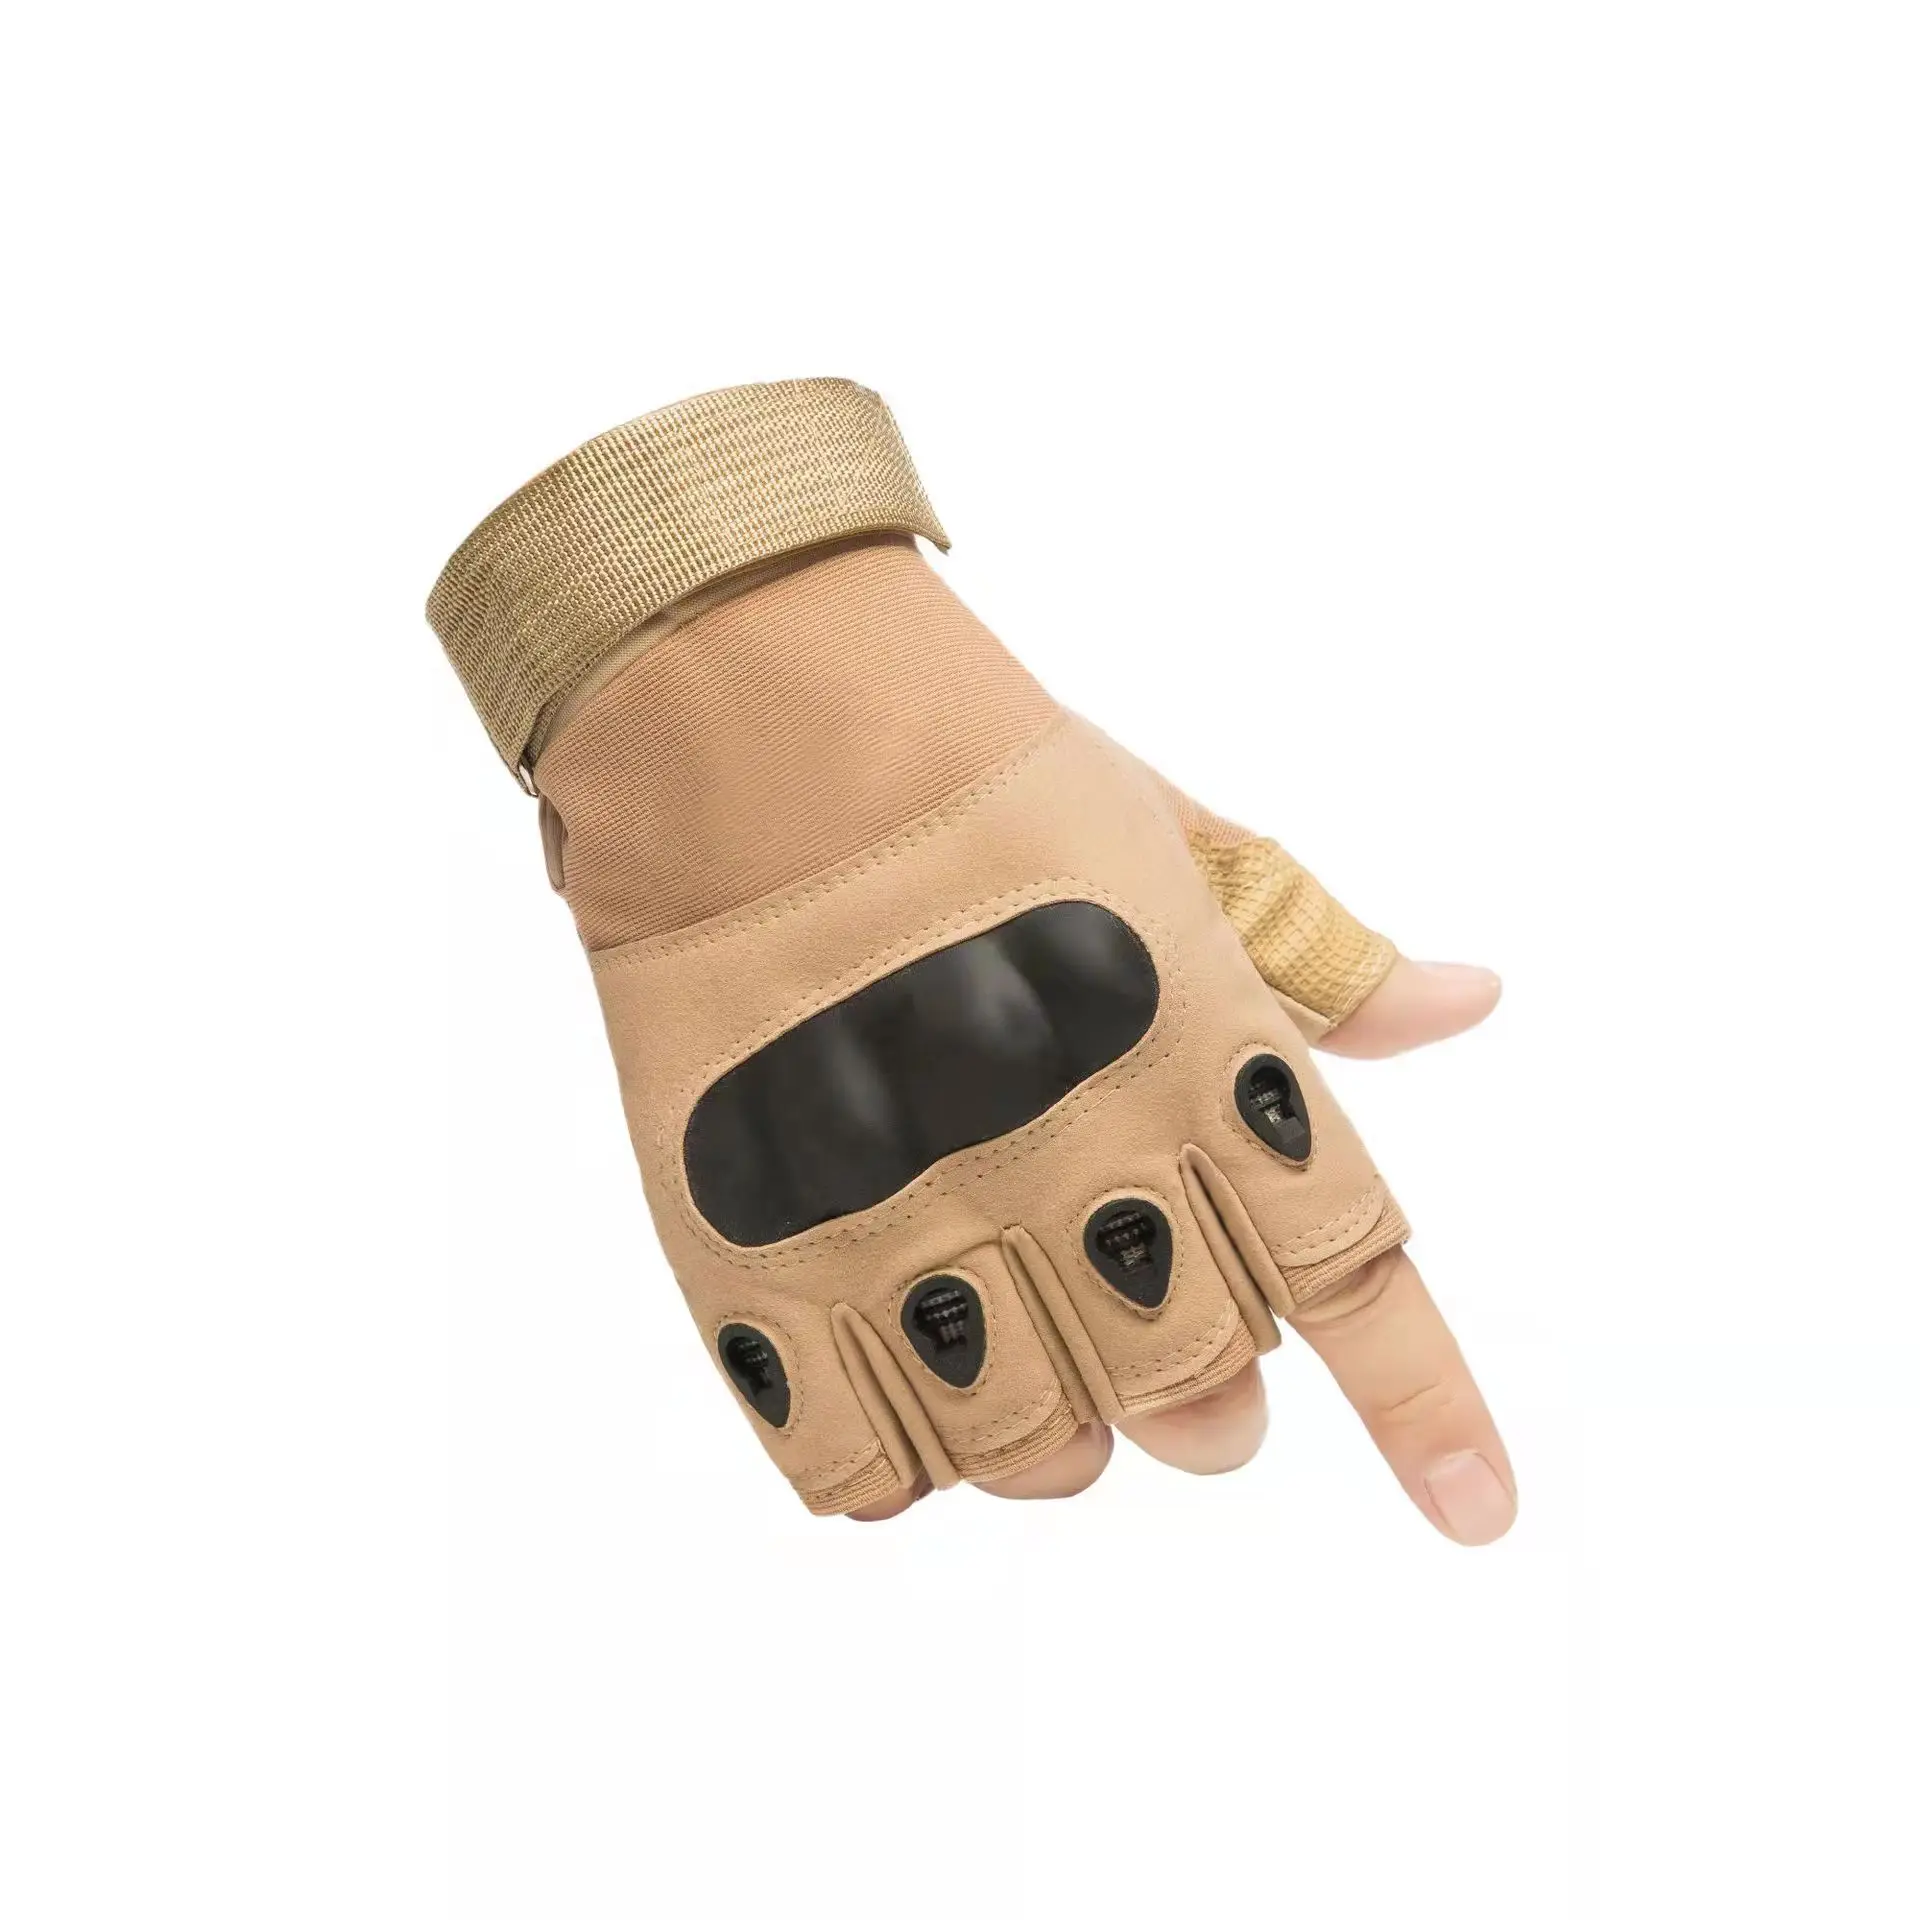 Adjustable Tactical Gloves, Outdoor Sports Climbing Gloves, Protect Palm Joints, Breathable Motorcycle Riding Half-Finger Gloves